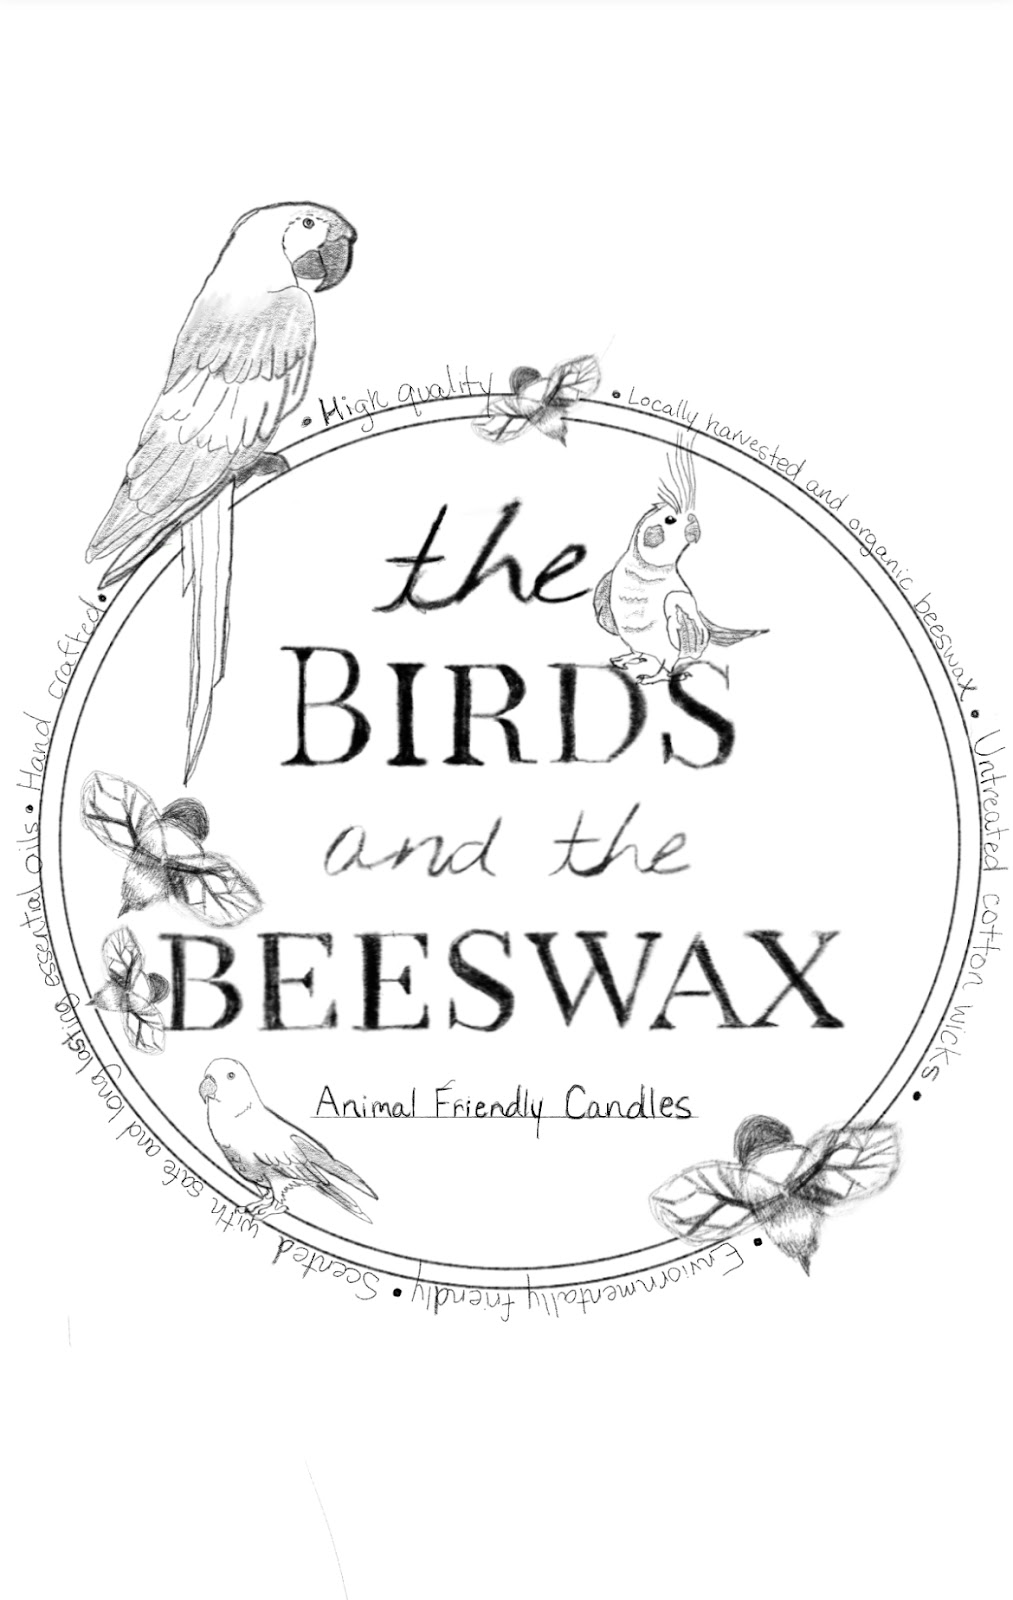 The Birds and the Beeswax | 824 Elty Ave, Vineland, NJ 08360 | Phone: (856) 212-6736